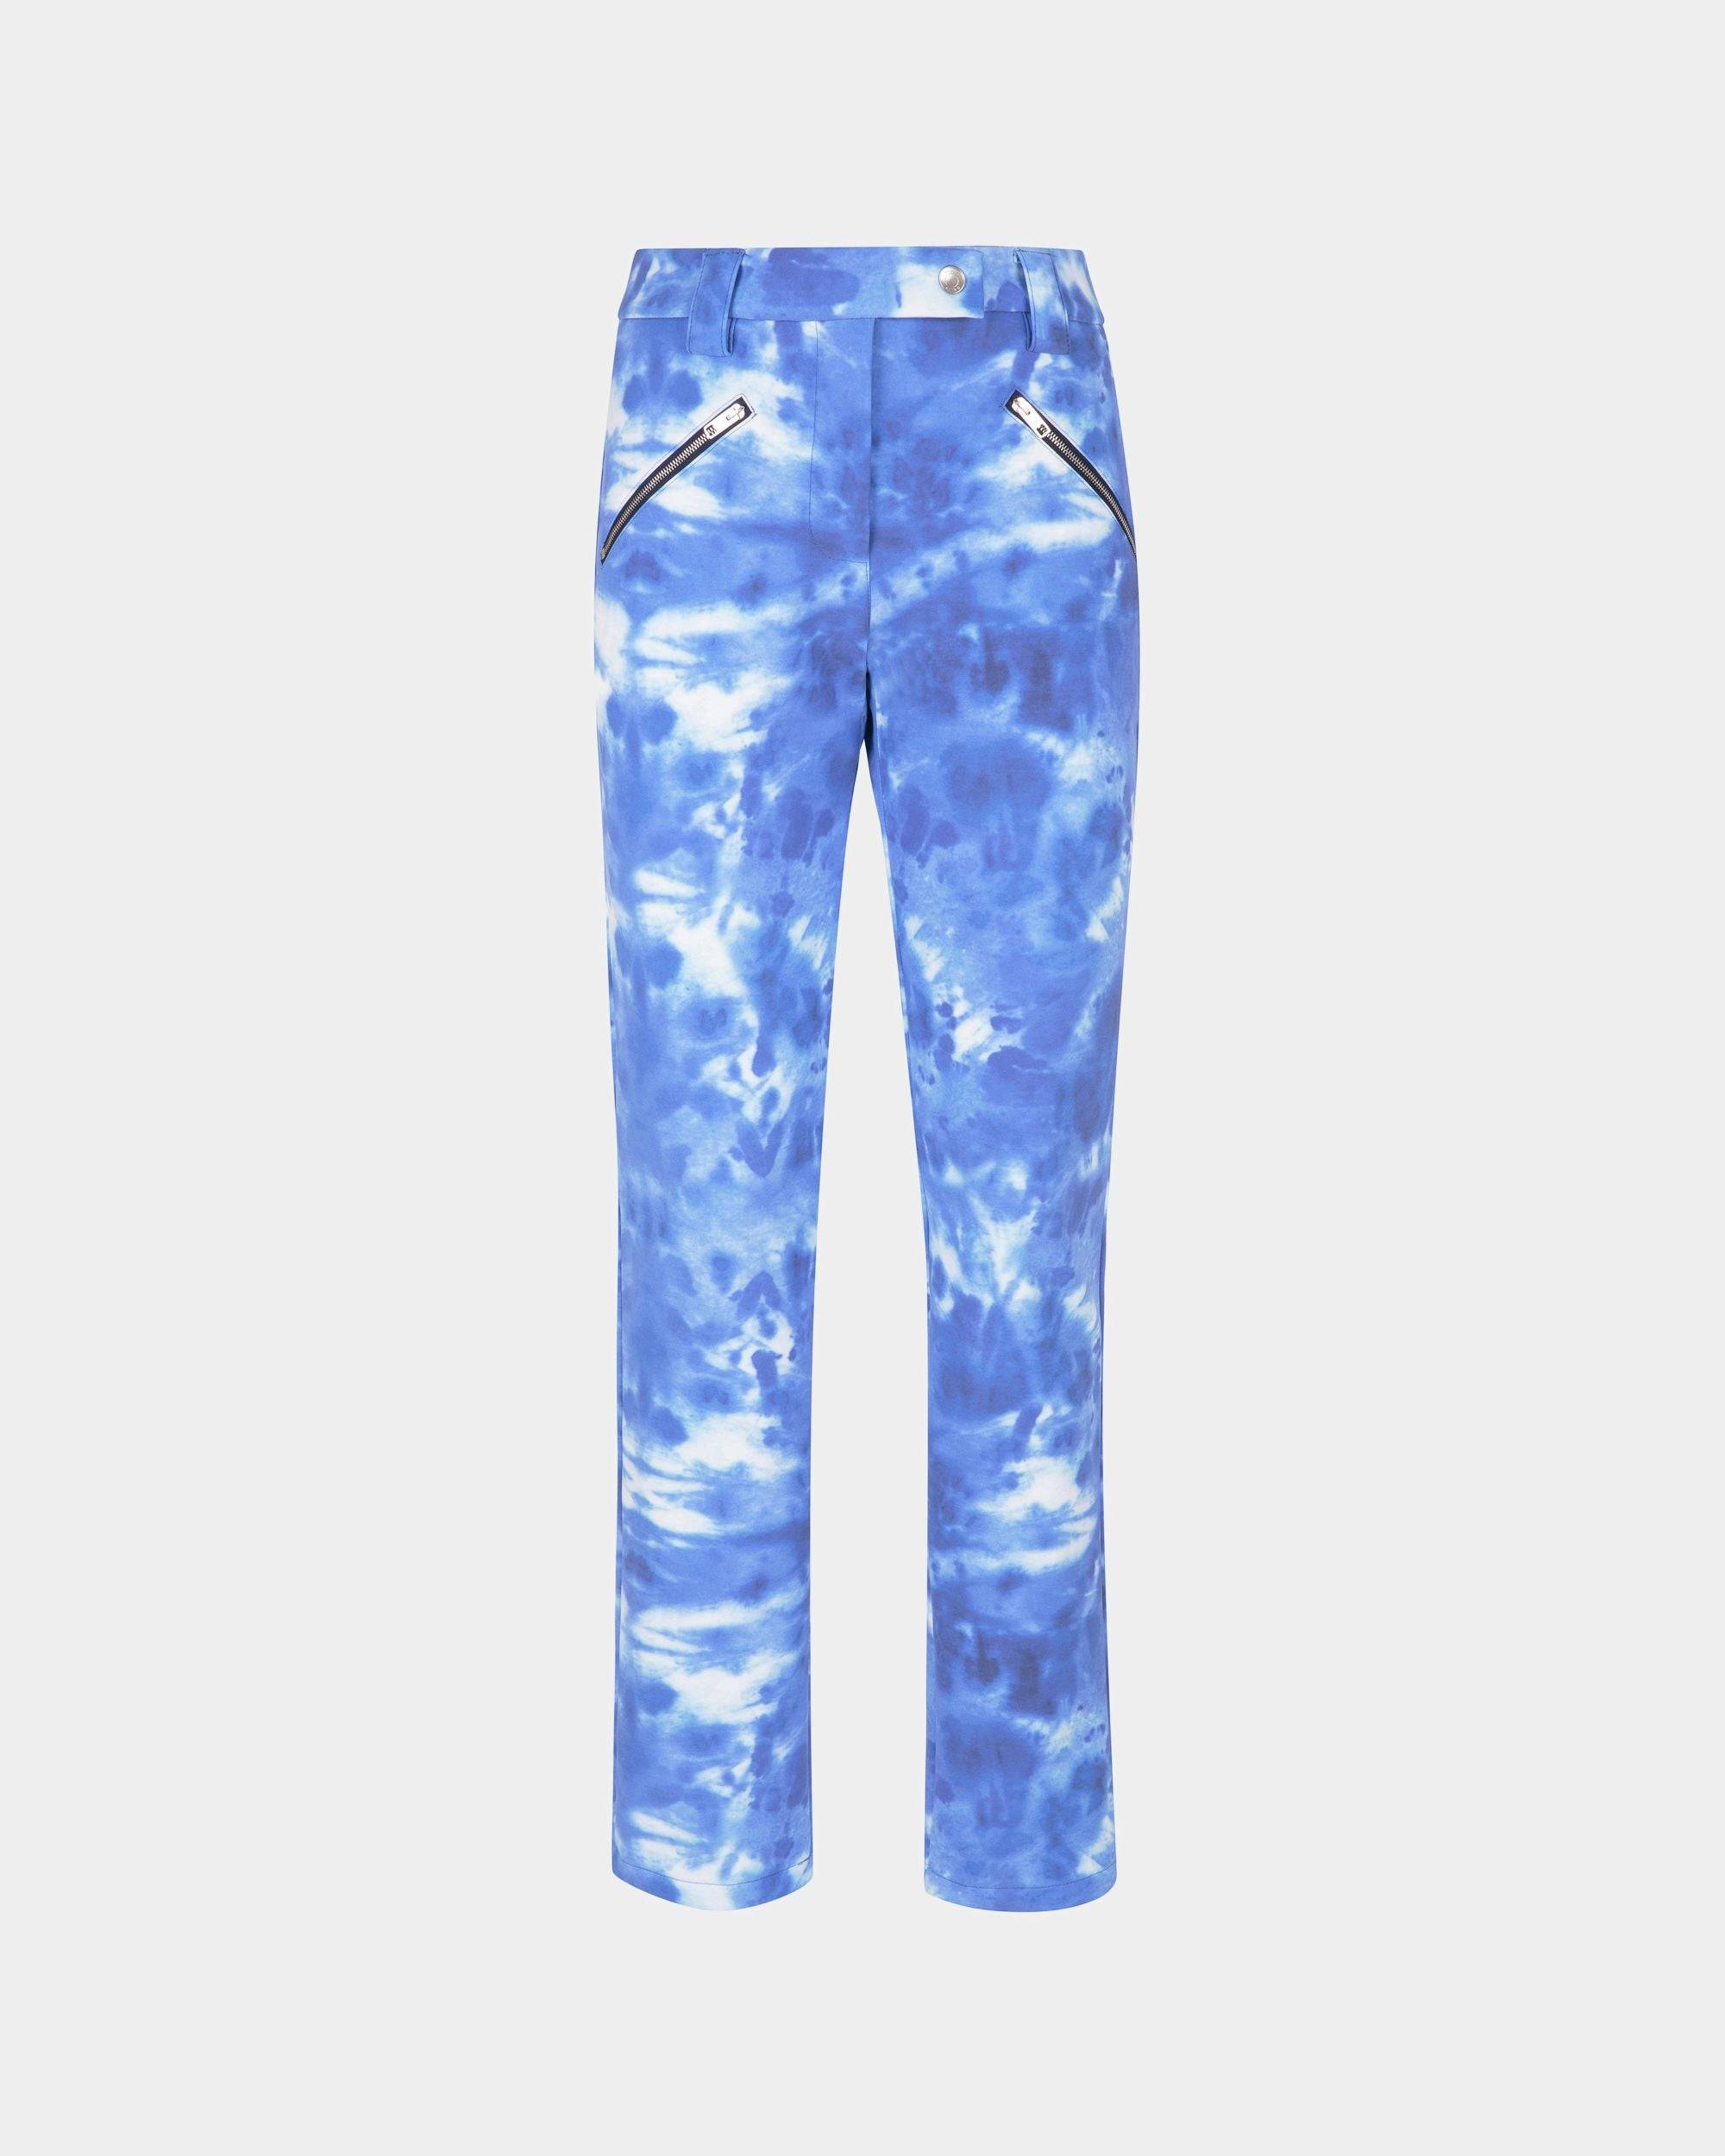 Women's Stretch Pants In Blue | Bally | Still Life Front